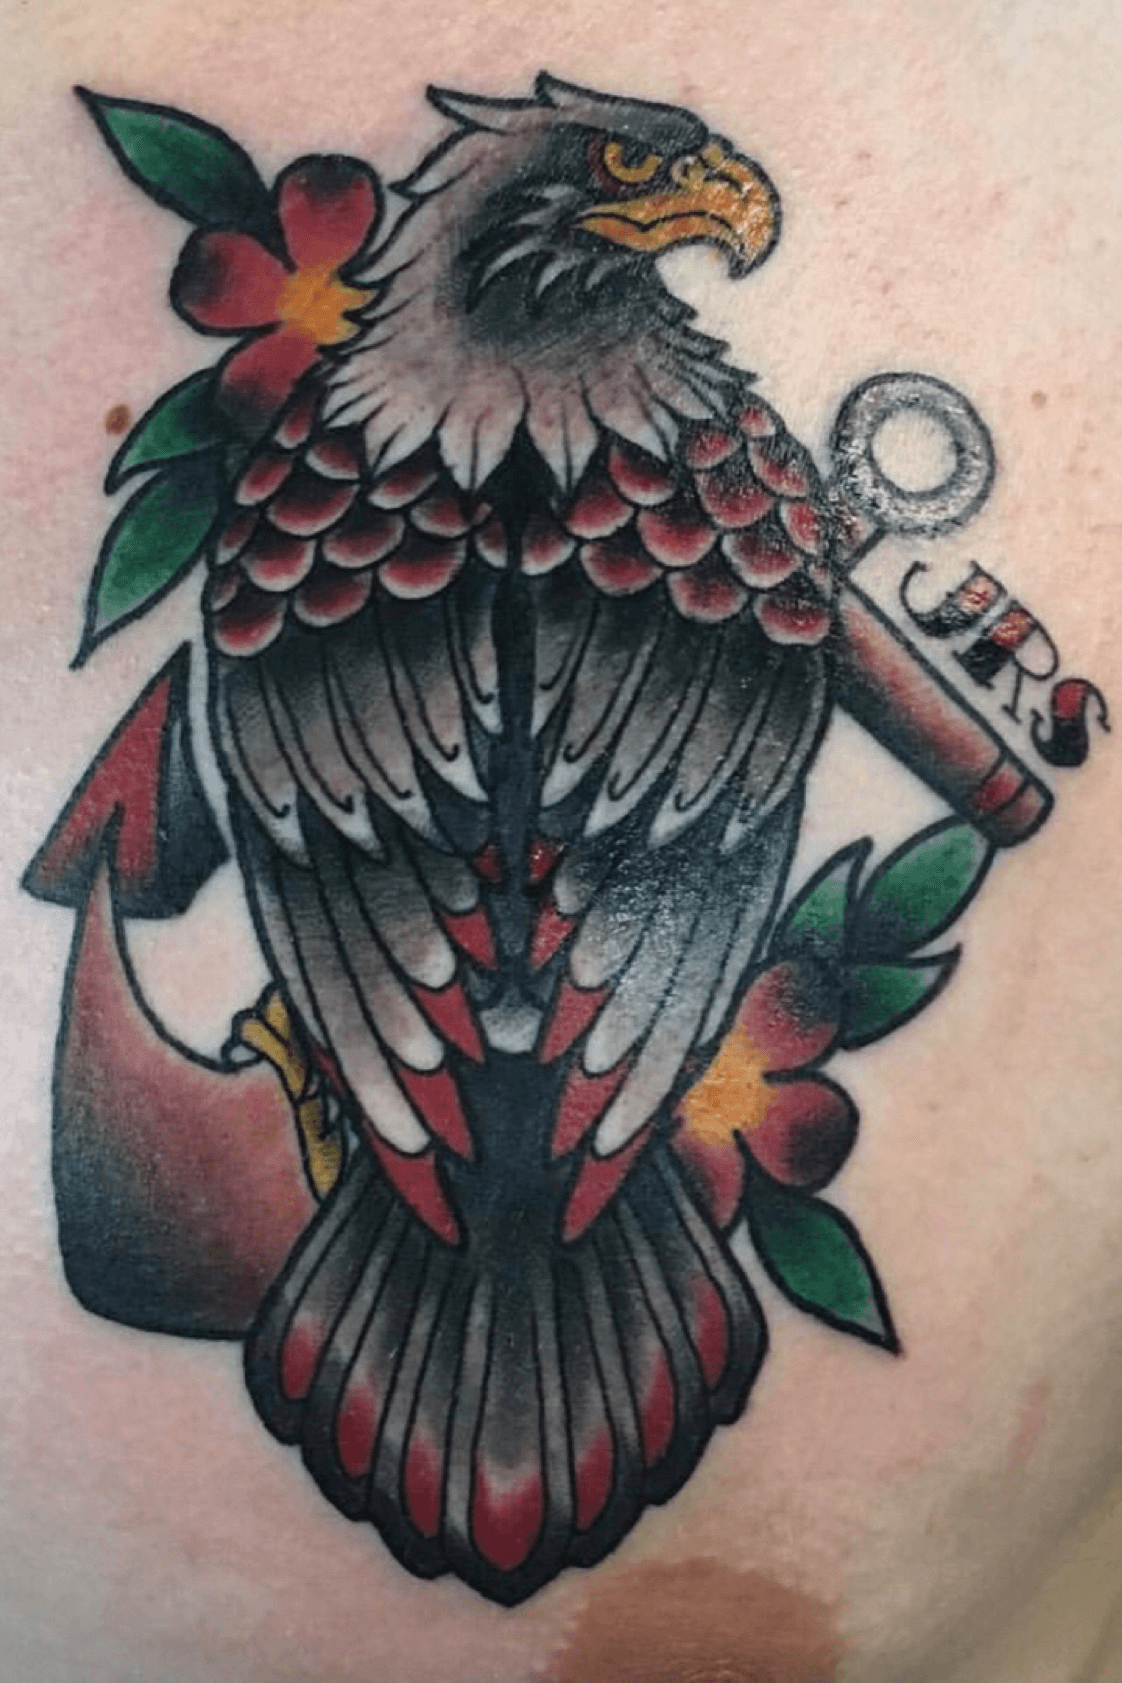 Tattoo uploaded by jakeskrine • Traditional eagle pearched on a sailor  jerry anchor #sailor #eagle #anchor #jrs #tradional • Tattoodo